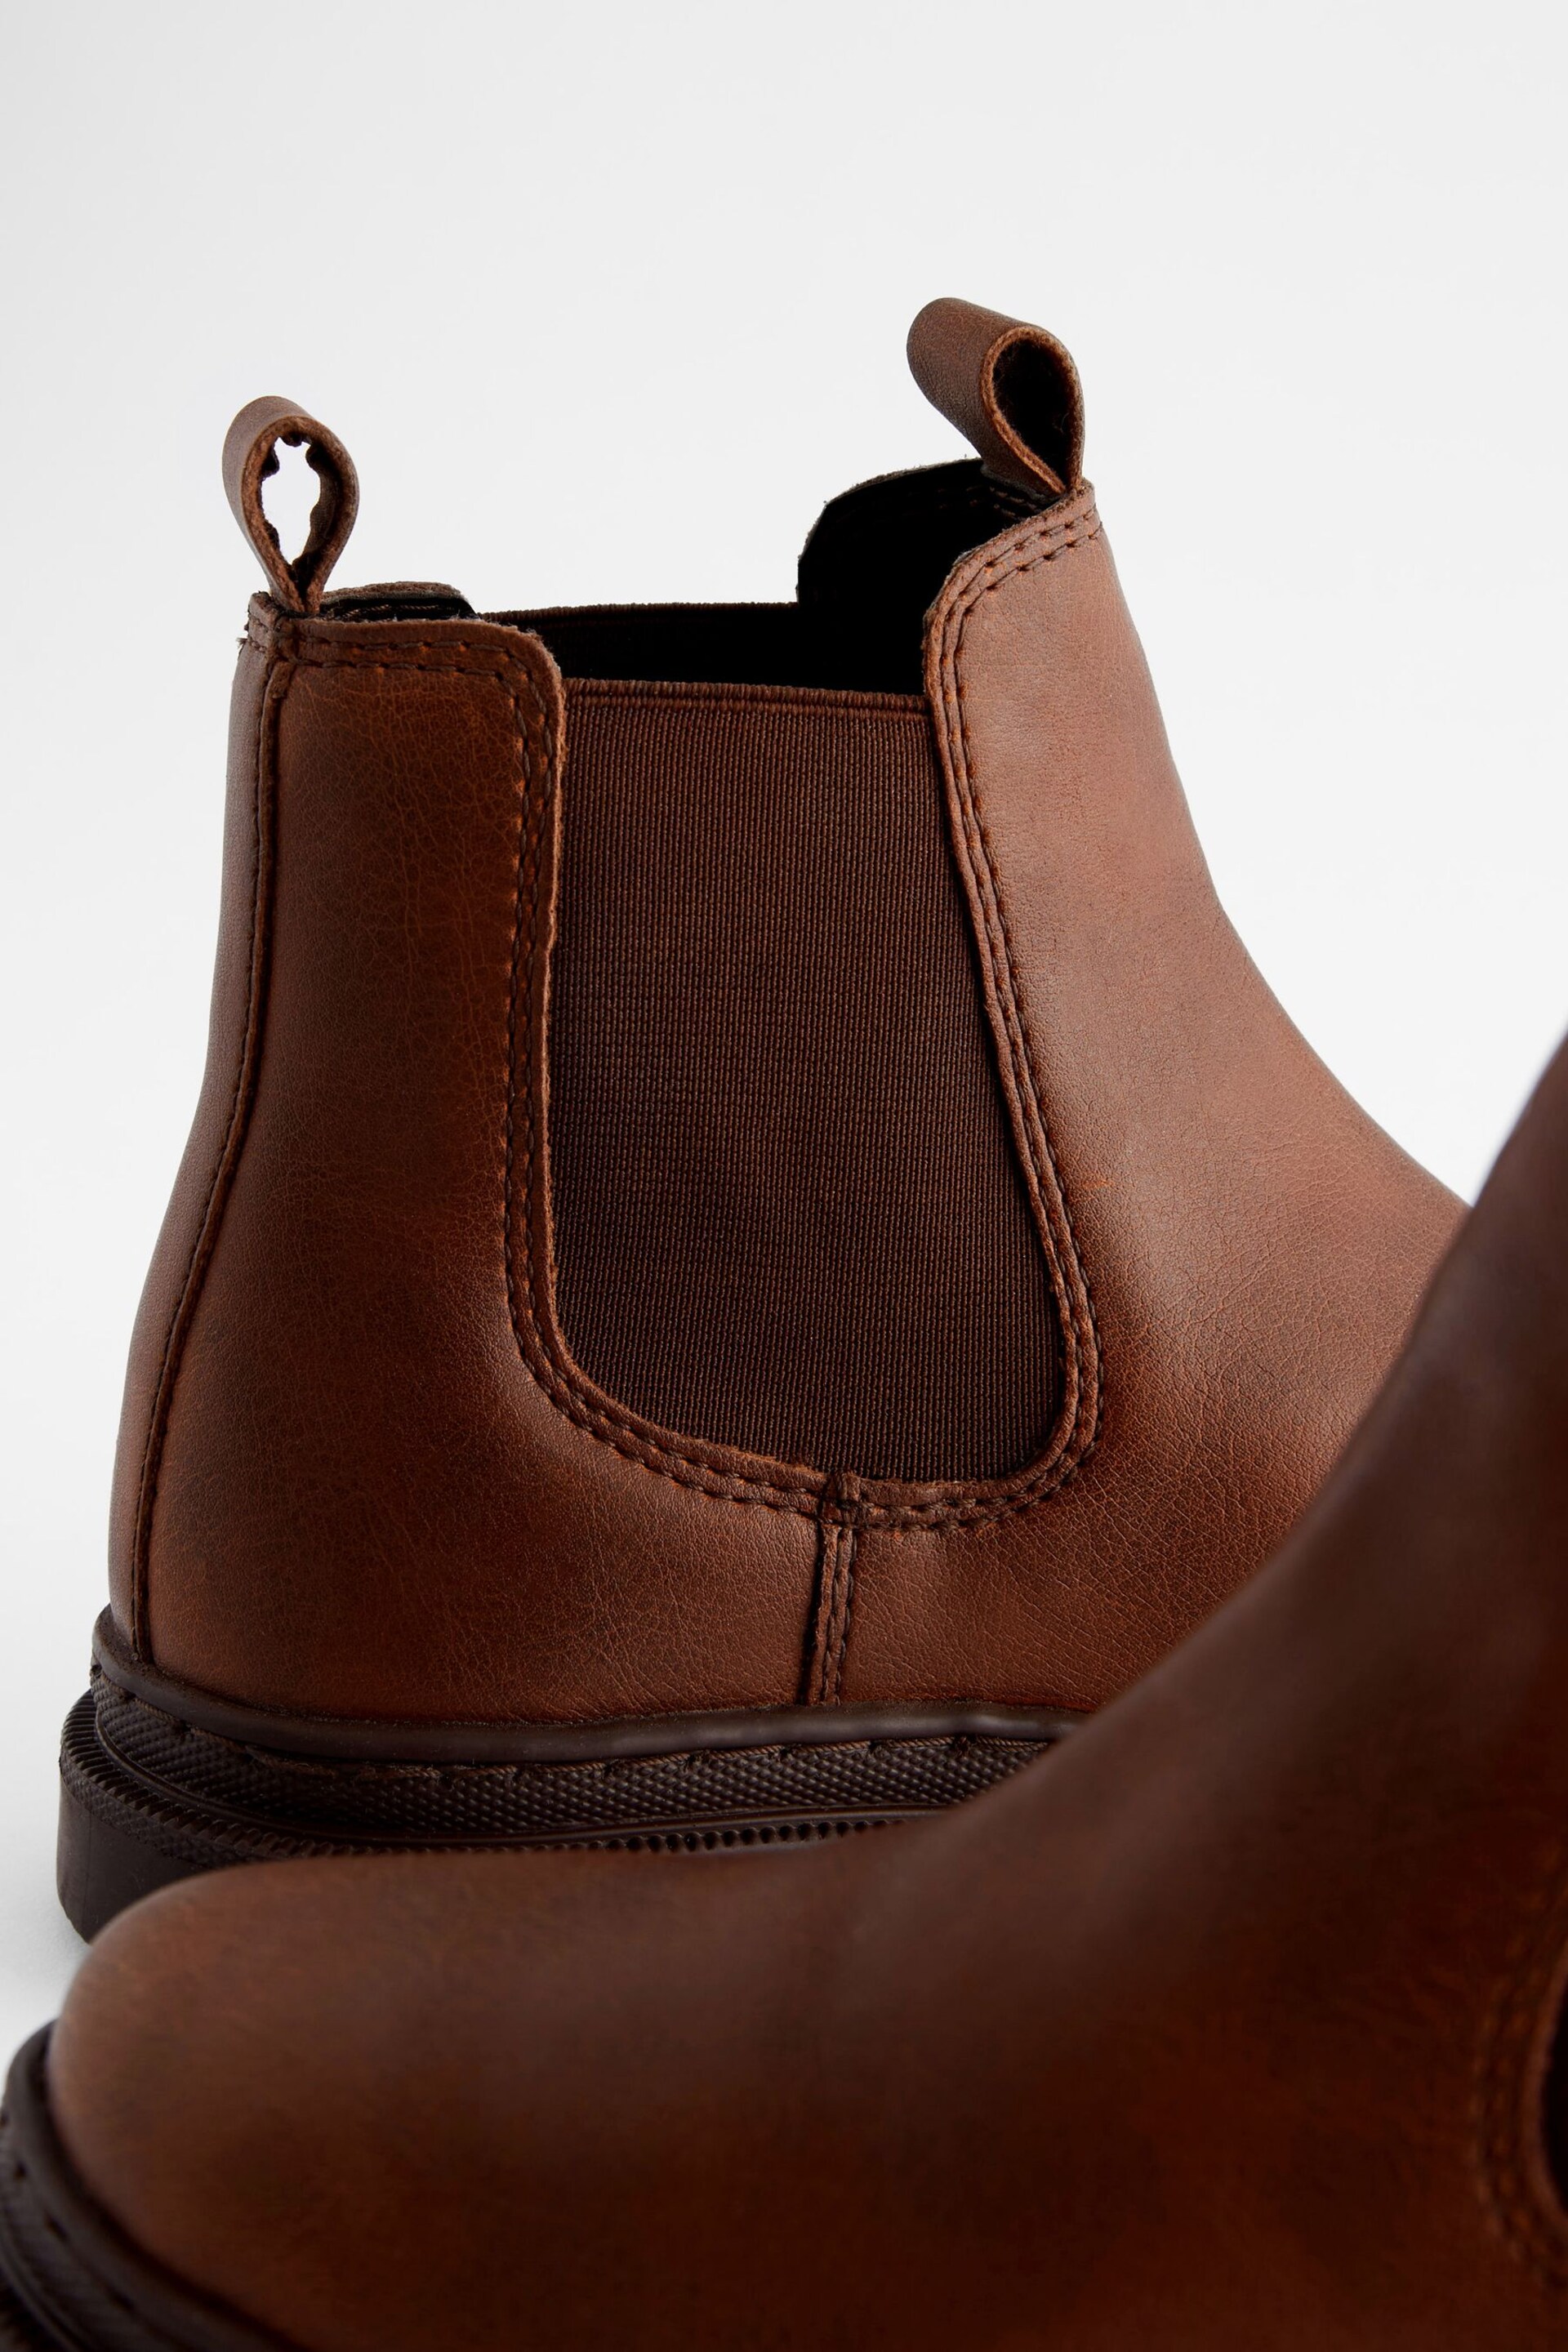 Chocolate Brown Chelsea Boots - Image 5 of 5